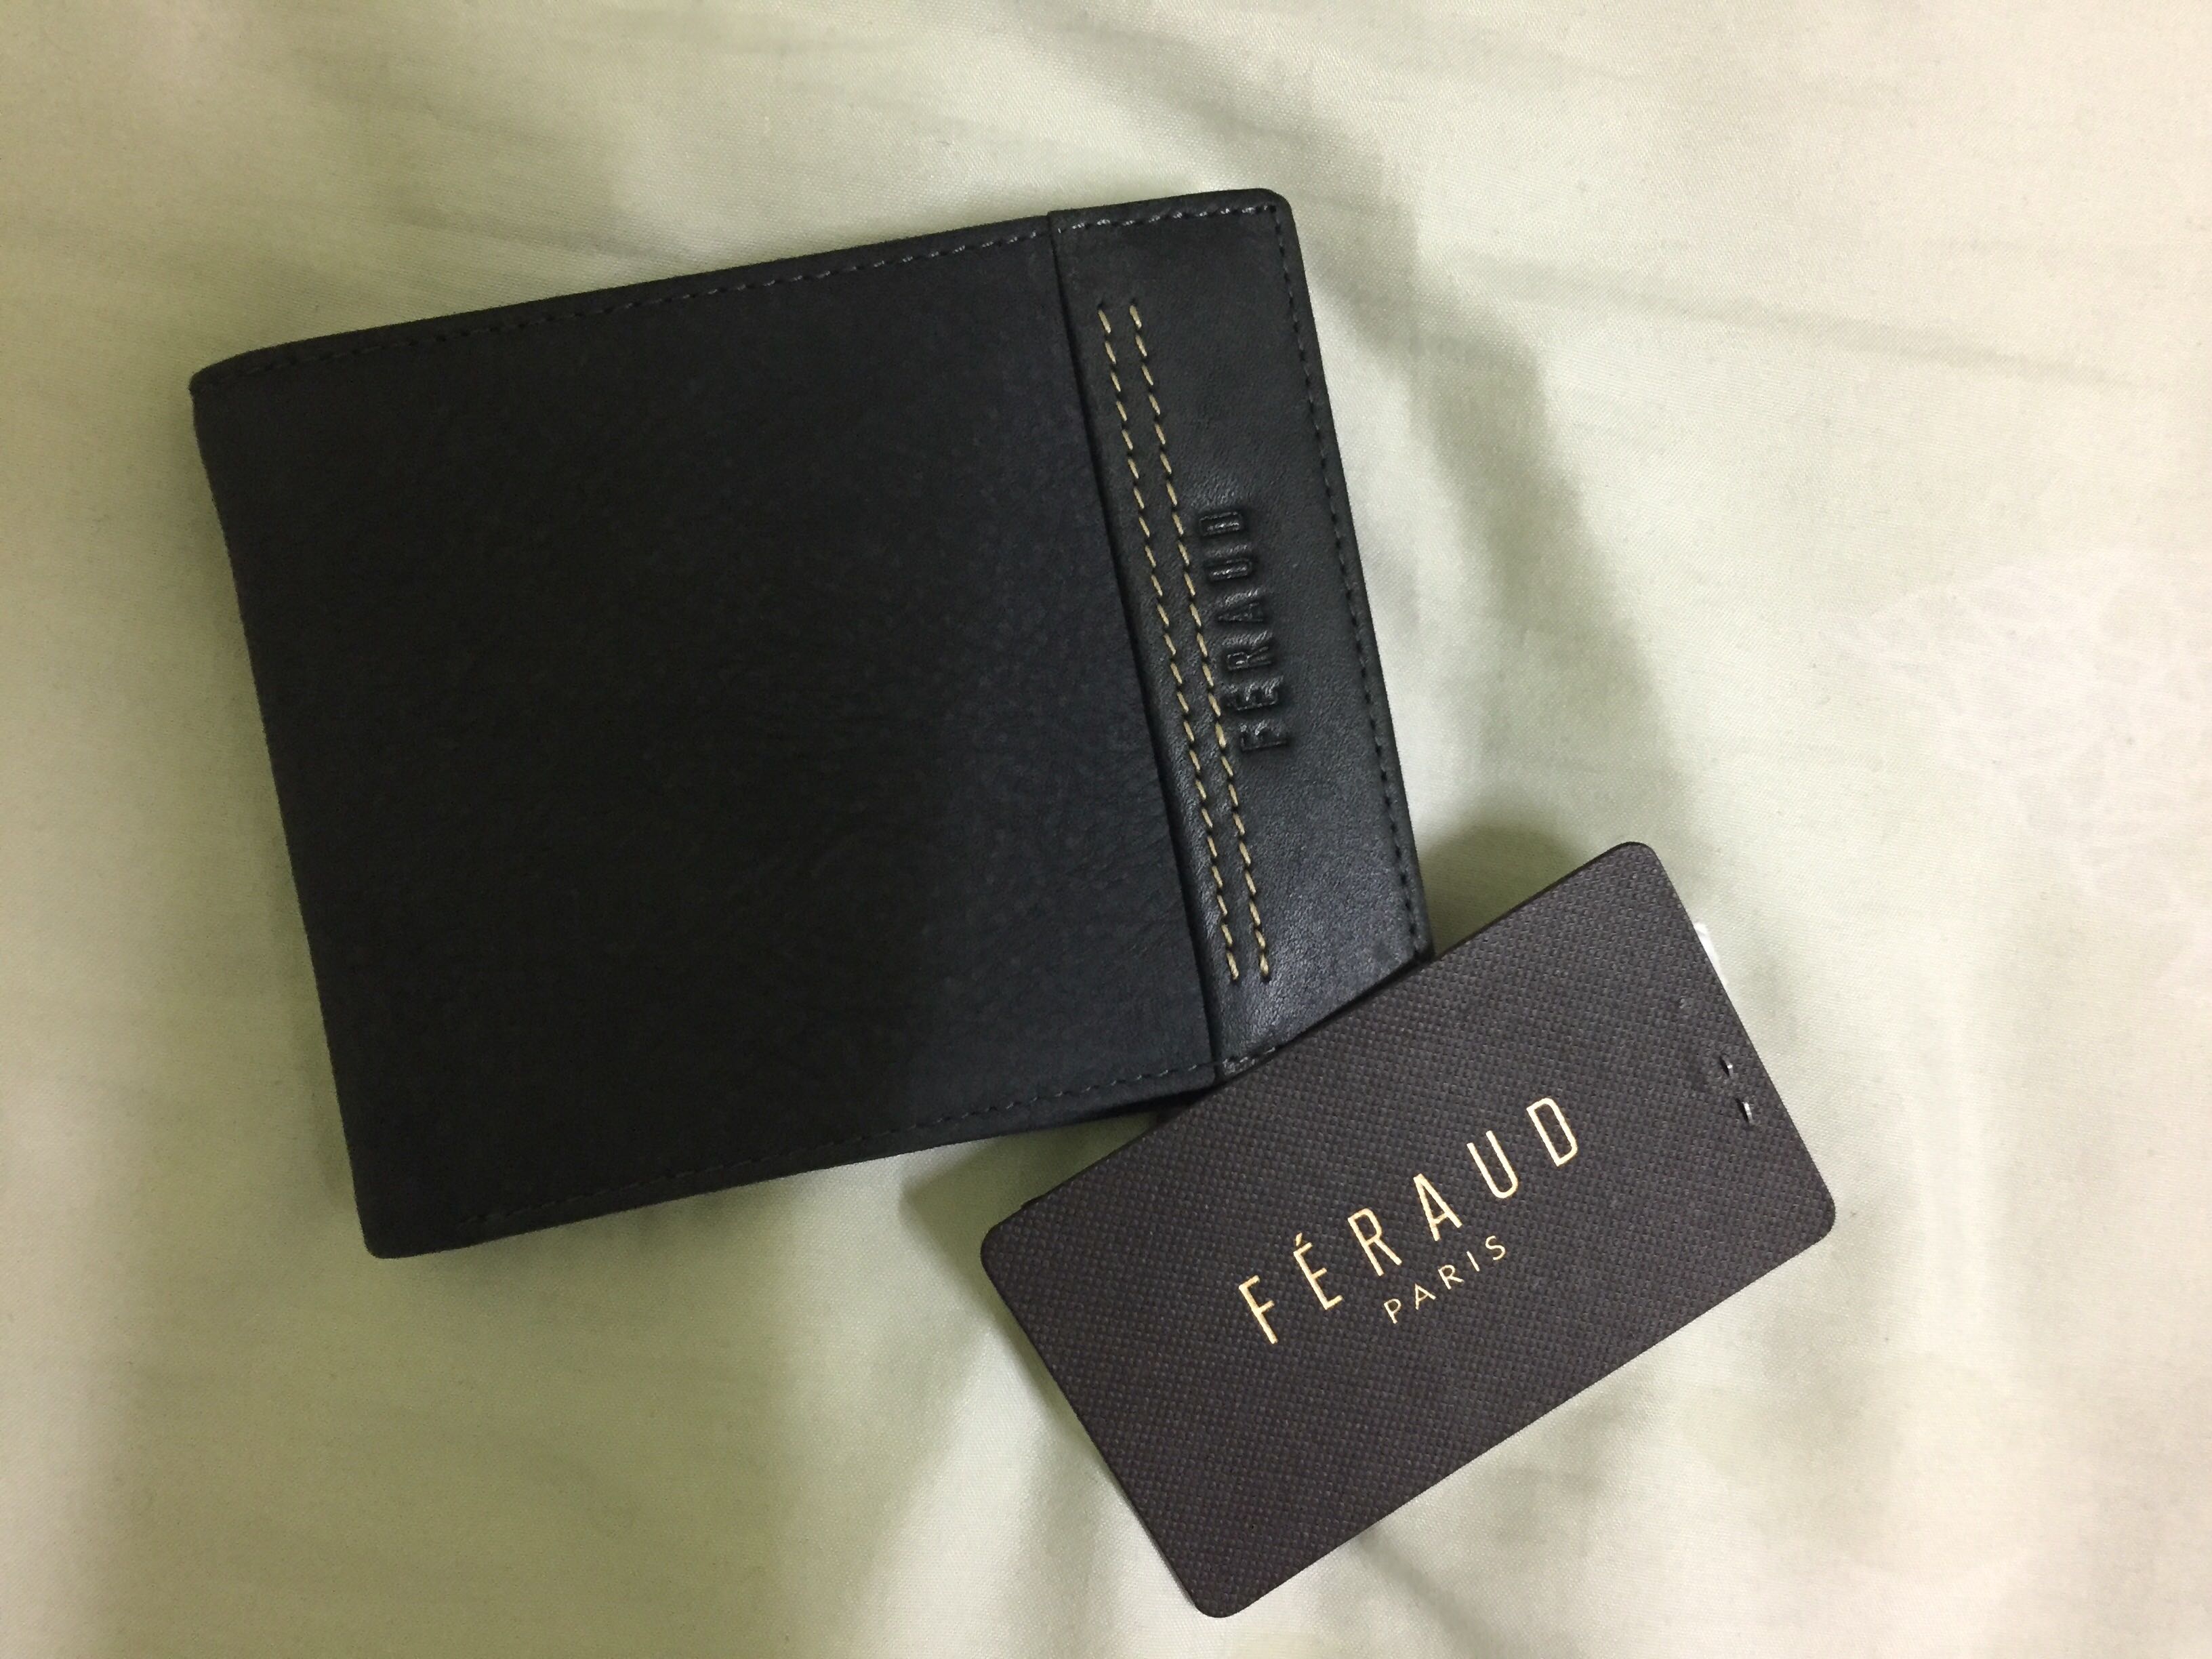 Vintage Louis Feraud Paris Leather Wallet Made in Italy. 